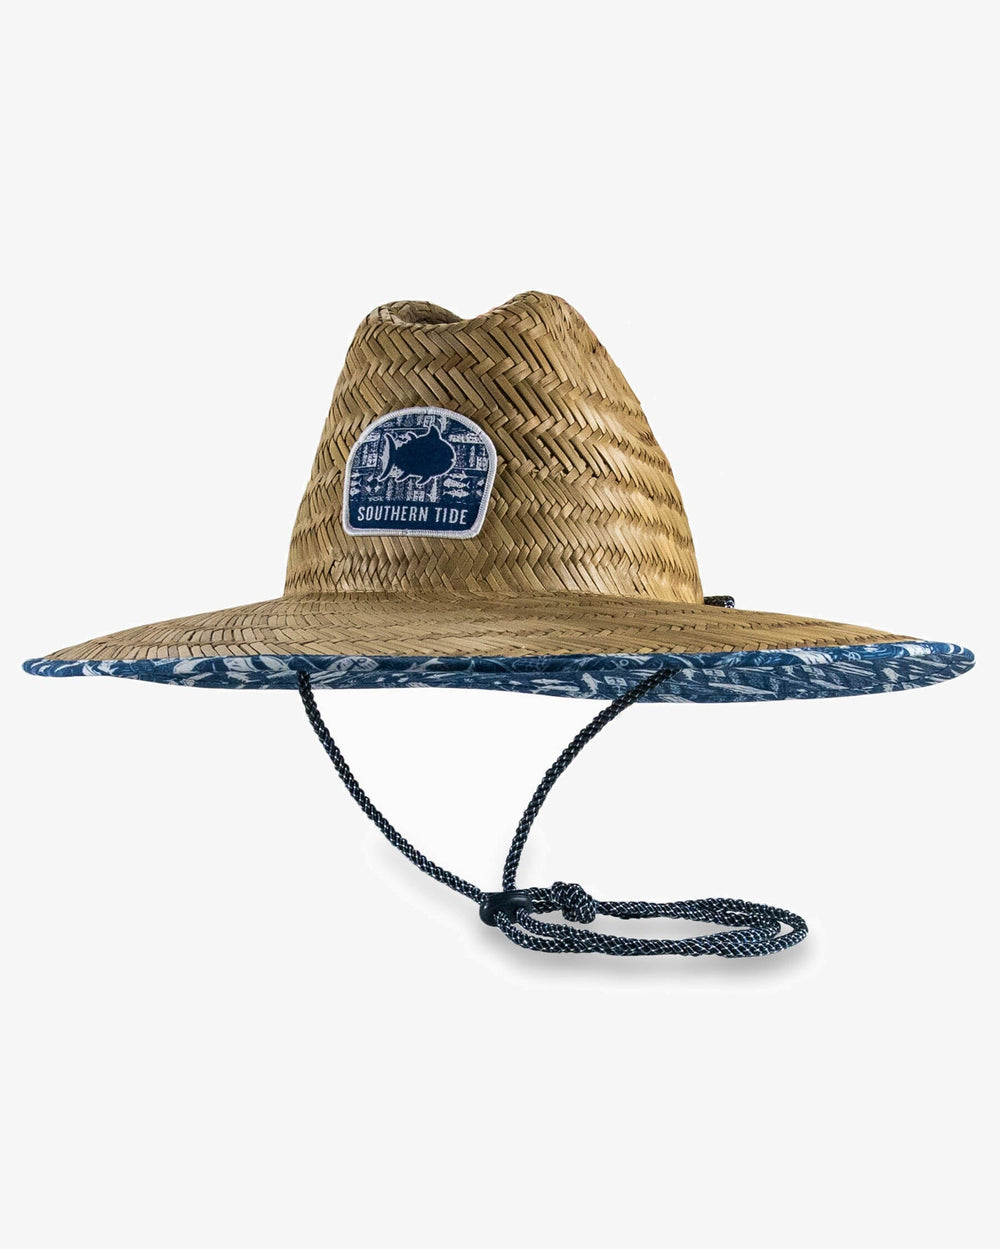 The front view of the Southern Tide All Inclusive Straw Hat by Southern Tide - Aged Denim